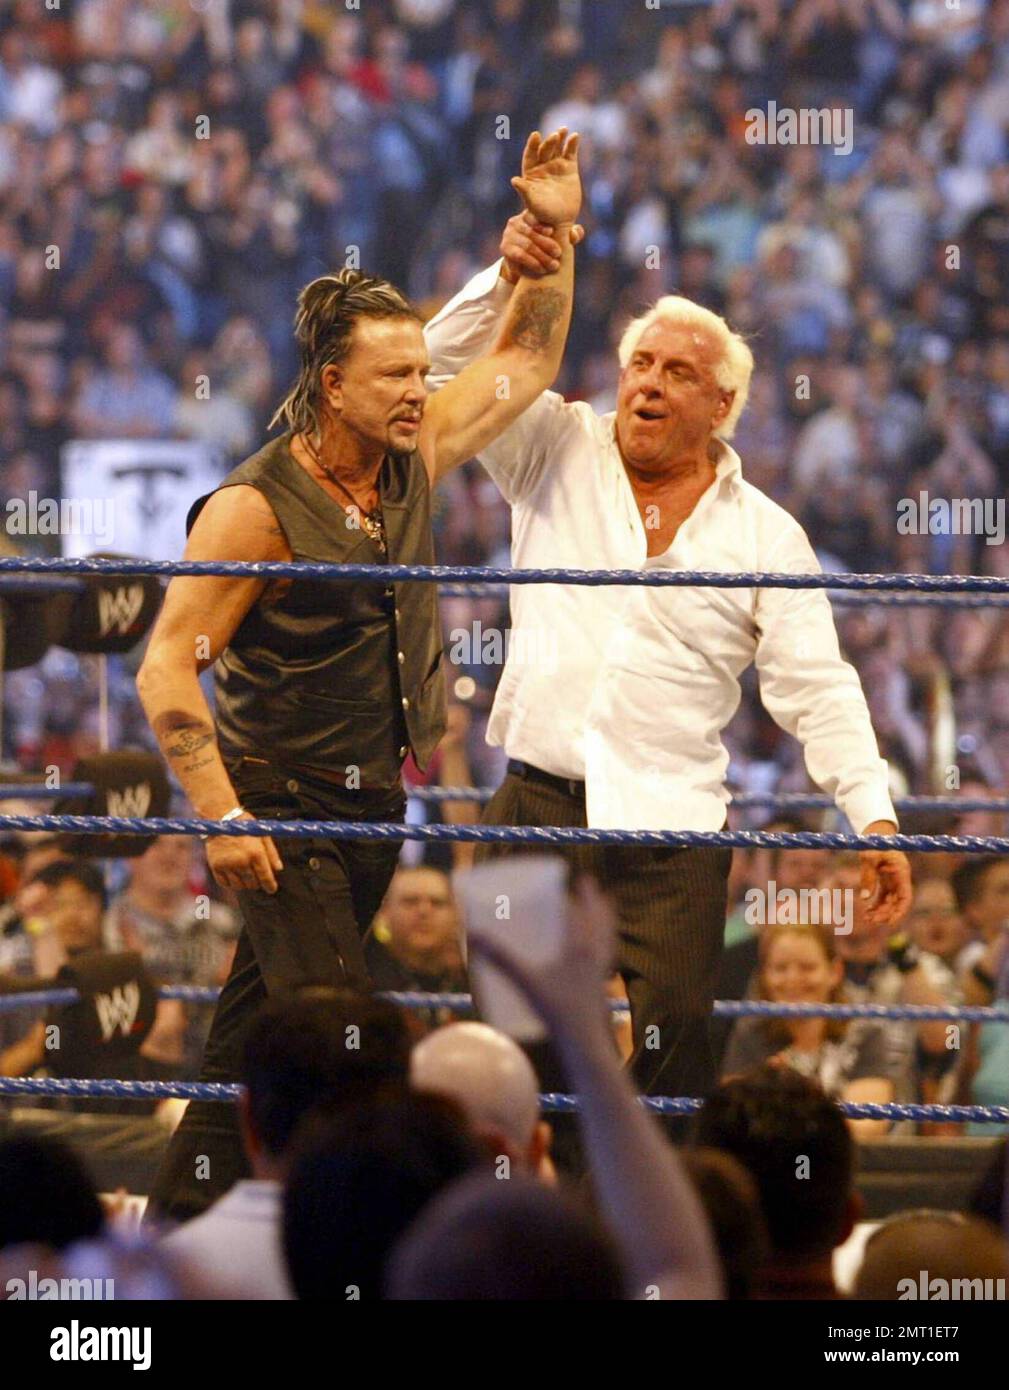 Academy Award nominee Mickey Rourke makes a special appearance in the ring with wrestler Ric Flair at Wrestlemania 25 at Reliant Stadium in Houston, TX. 4/5/09. Stock Photo